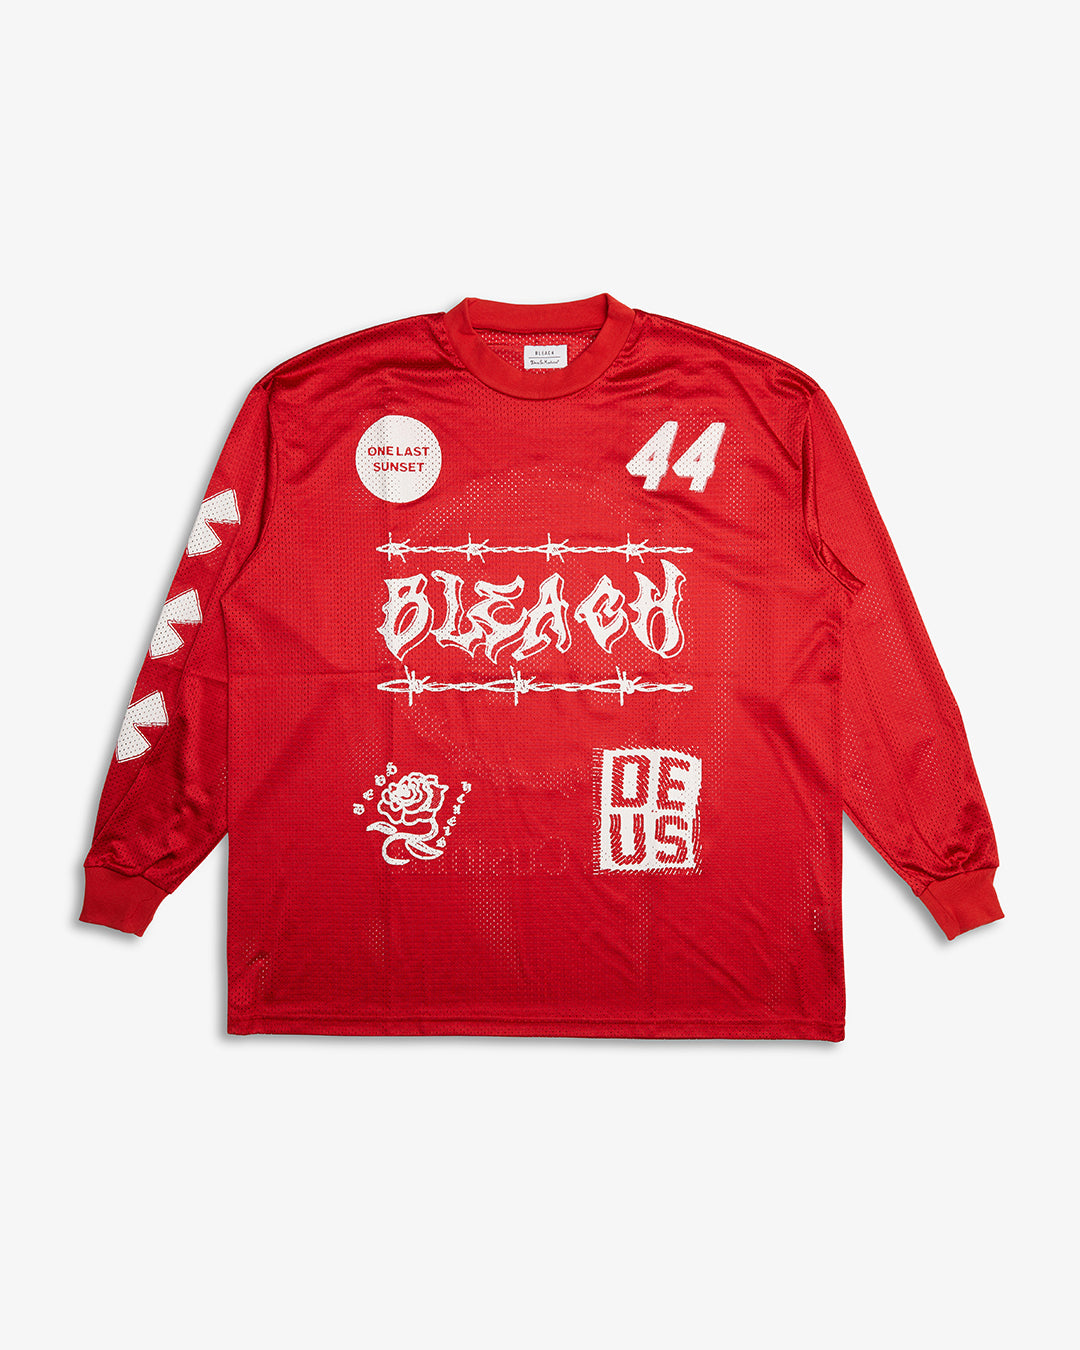 Fourty Four Jersey - Red